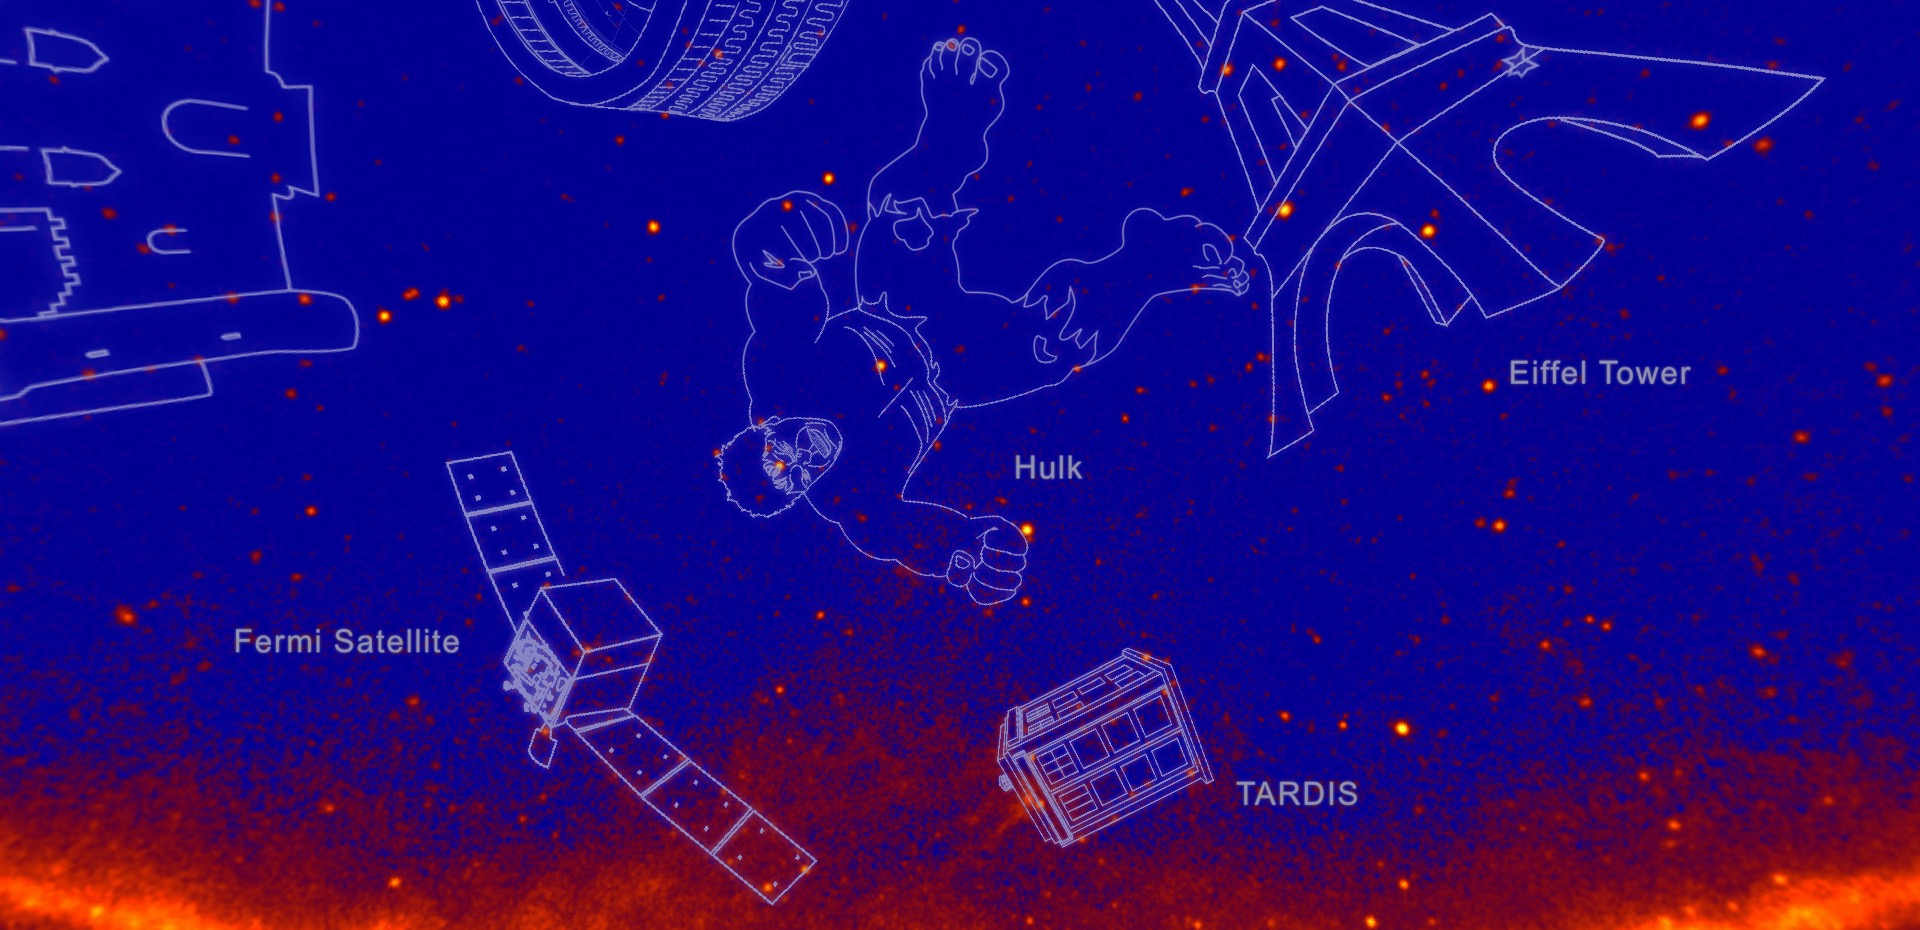 A still showing the part of the sky with the Hulk, Fermi Satellite and TARDIS gamma-ray constellations.Credit: NASA